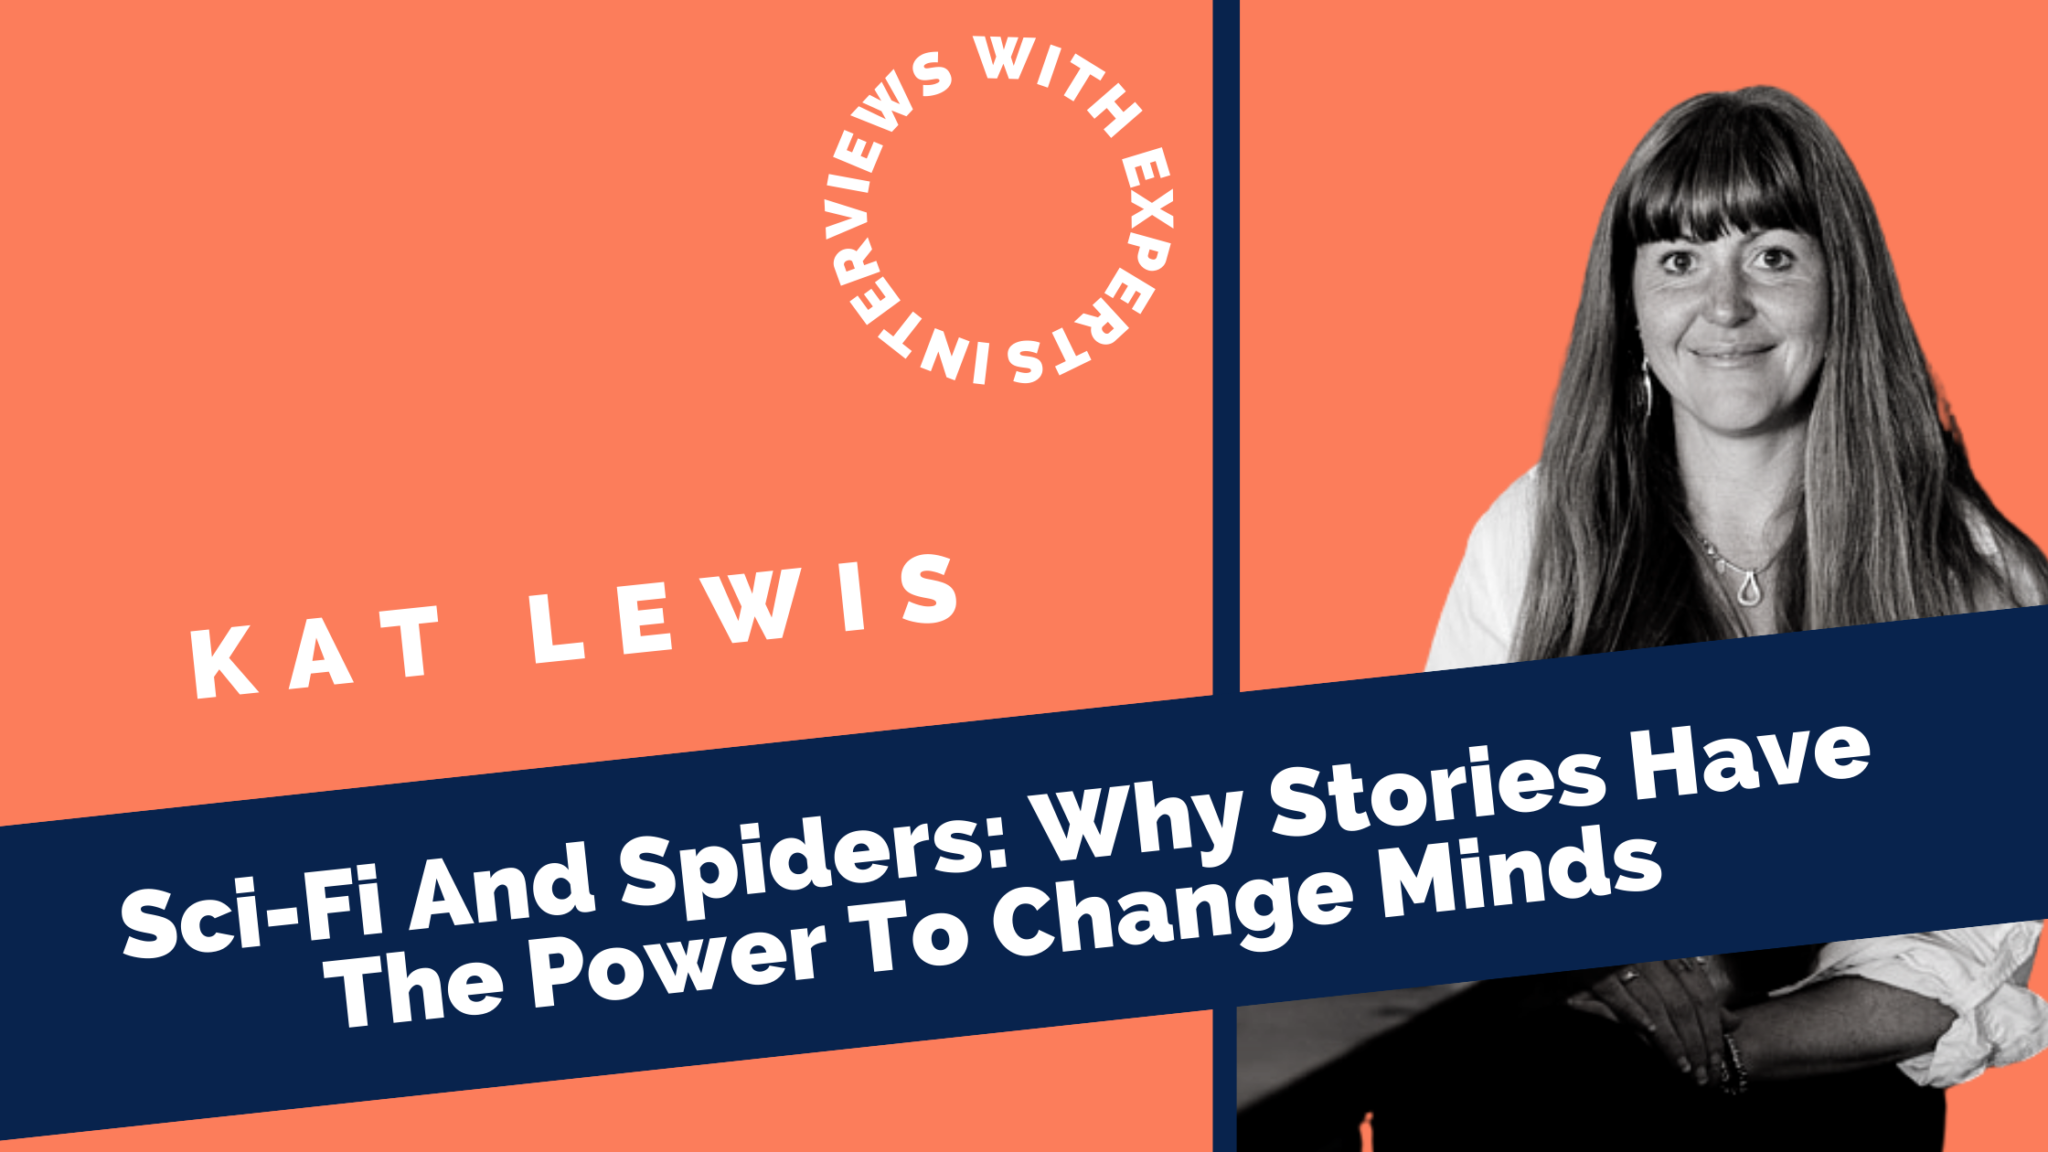 Sci-Fi And Spiders: Why Stories Have The Power To Change Minds